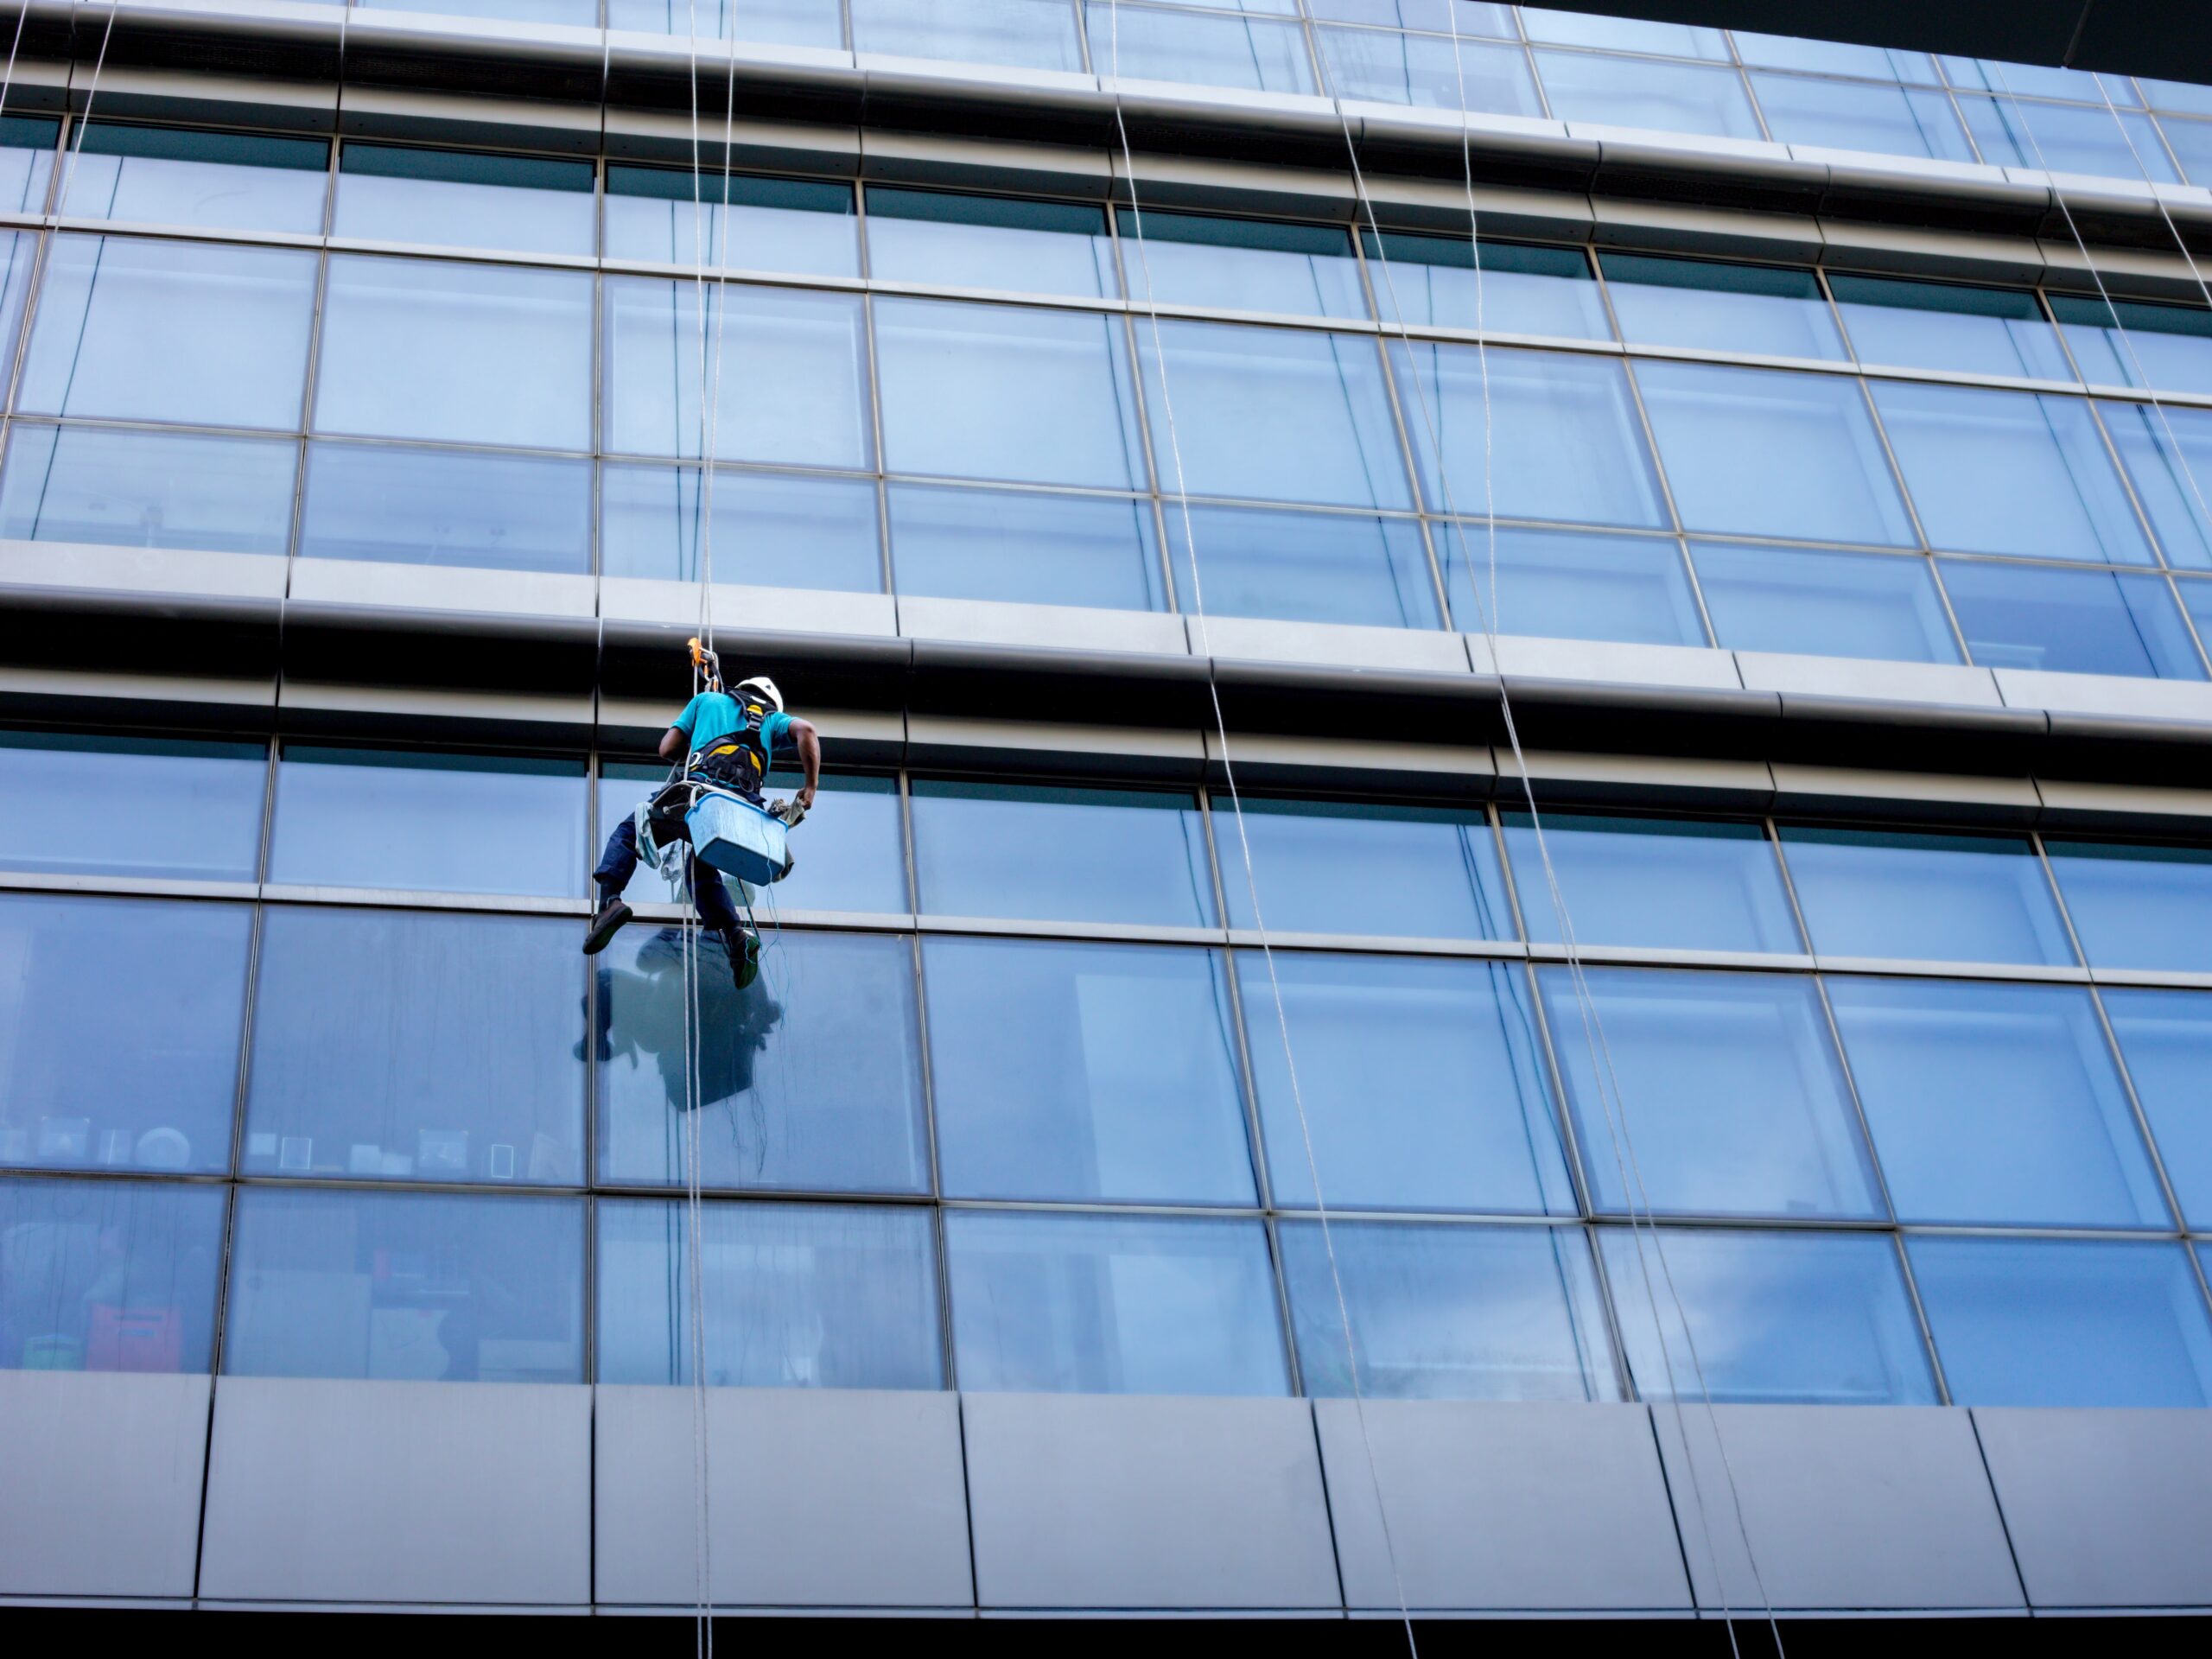 Window cleaner working on a glass.